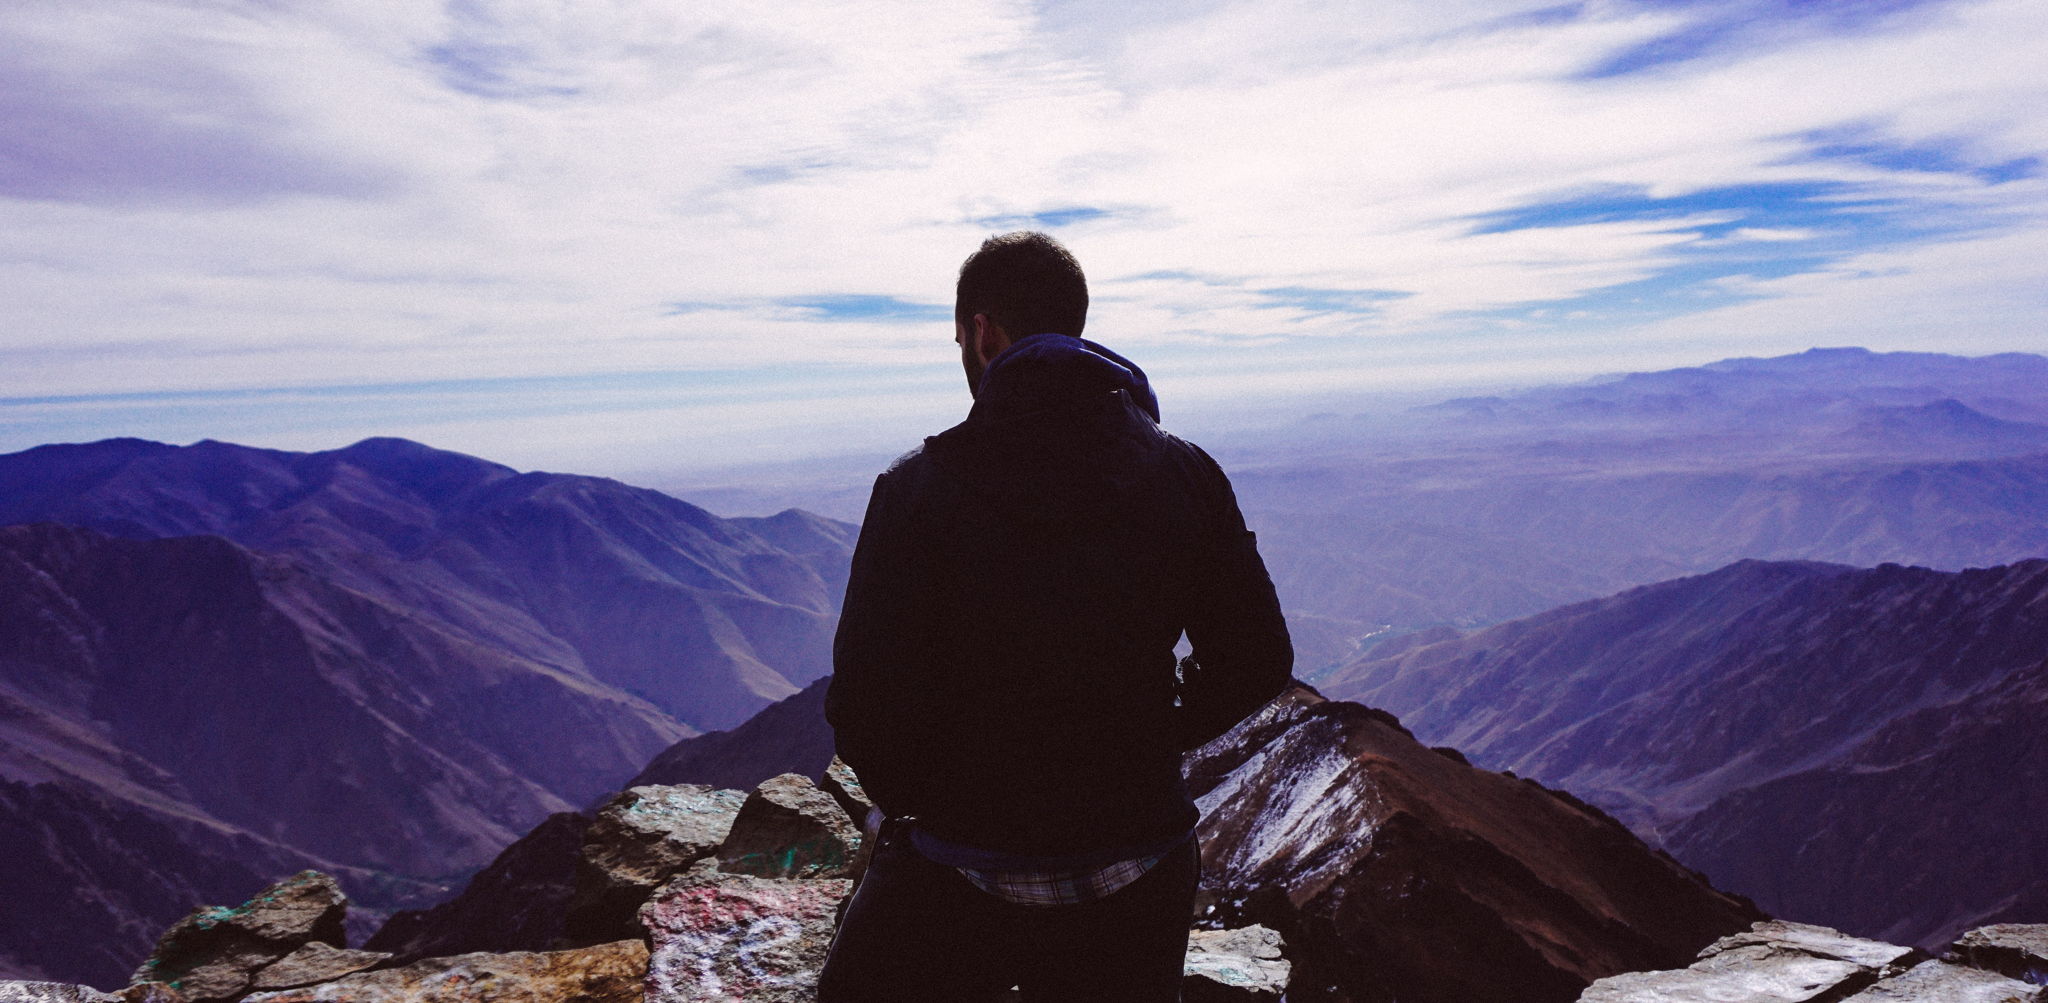 The silhouette of a man standing at the top of a hill overlooking the mountains.